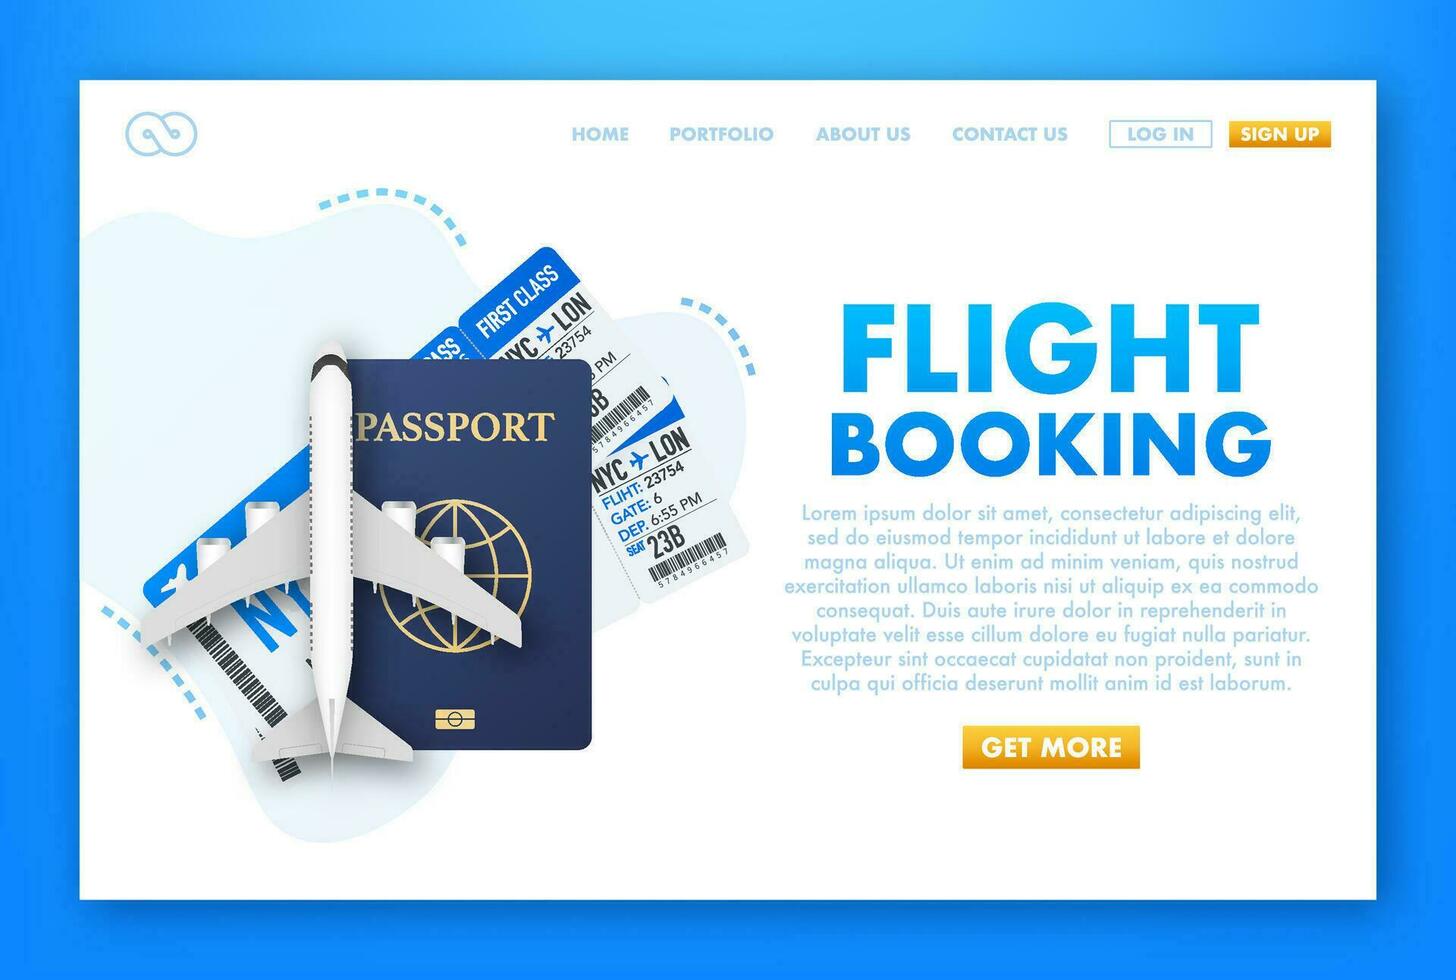 Airline tickets online, flight booking. Buying or booking online ticket. Travel, business flights worldwide. Vector illustration